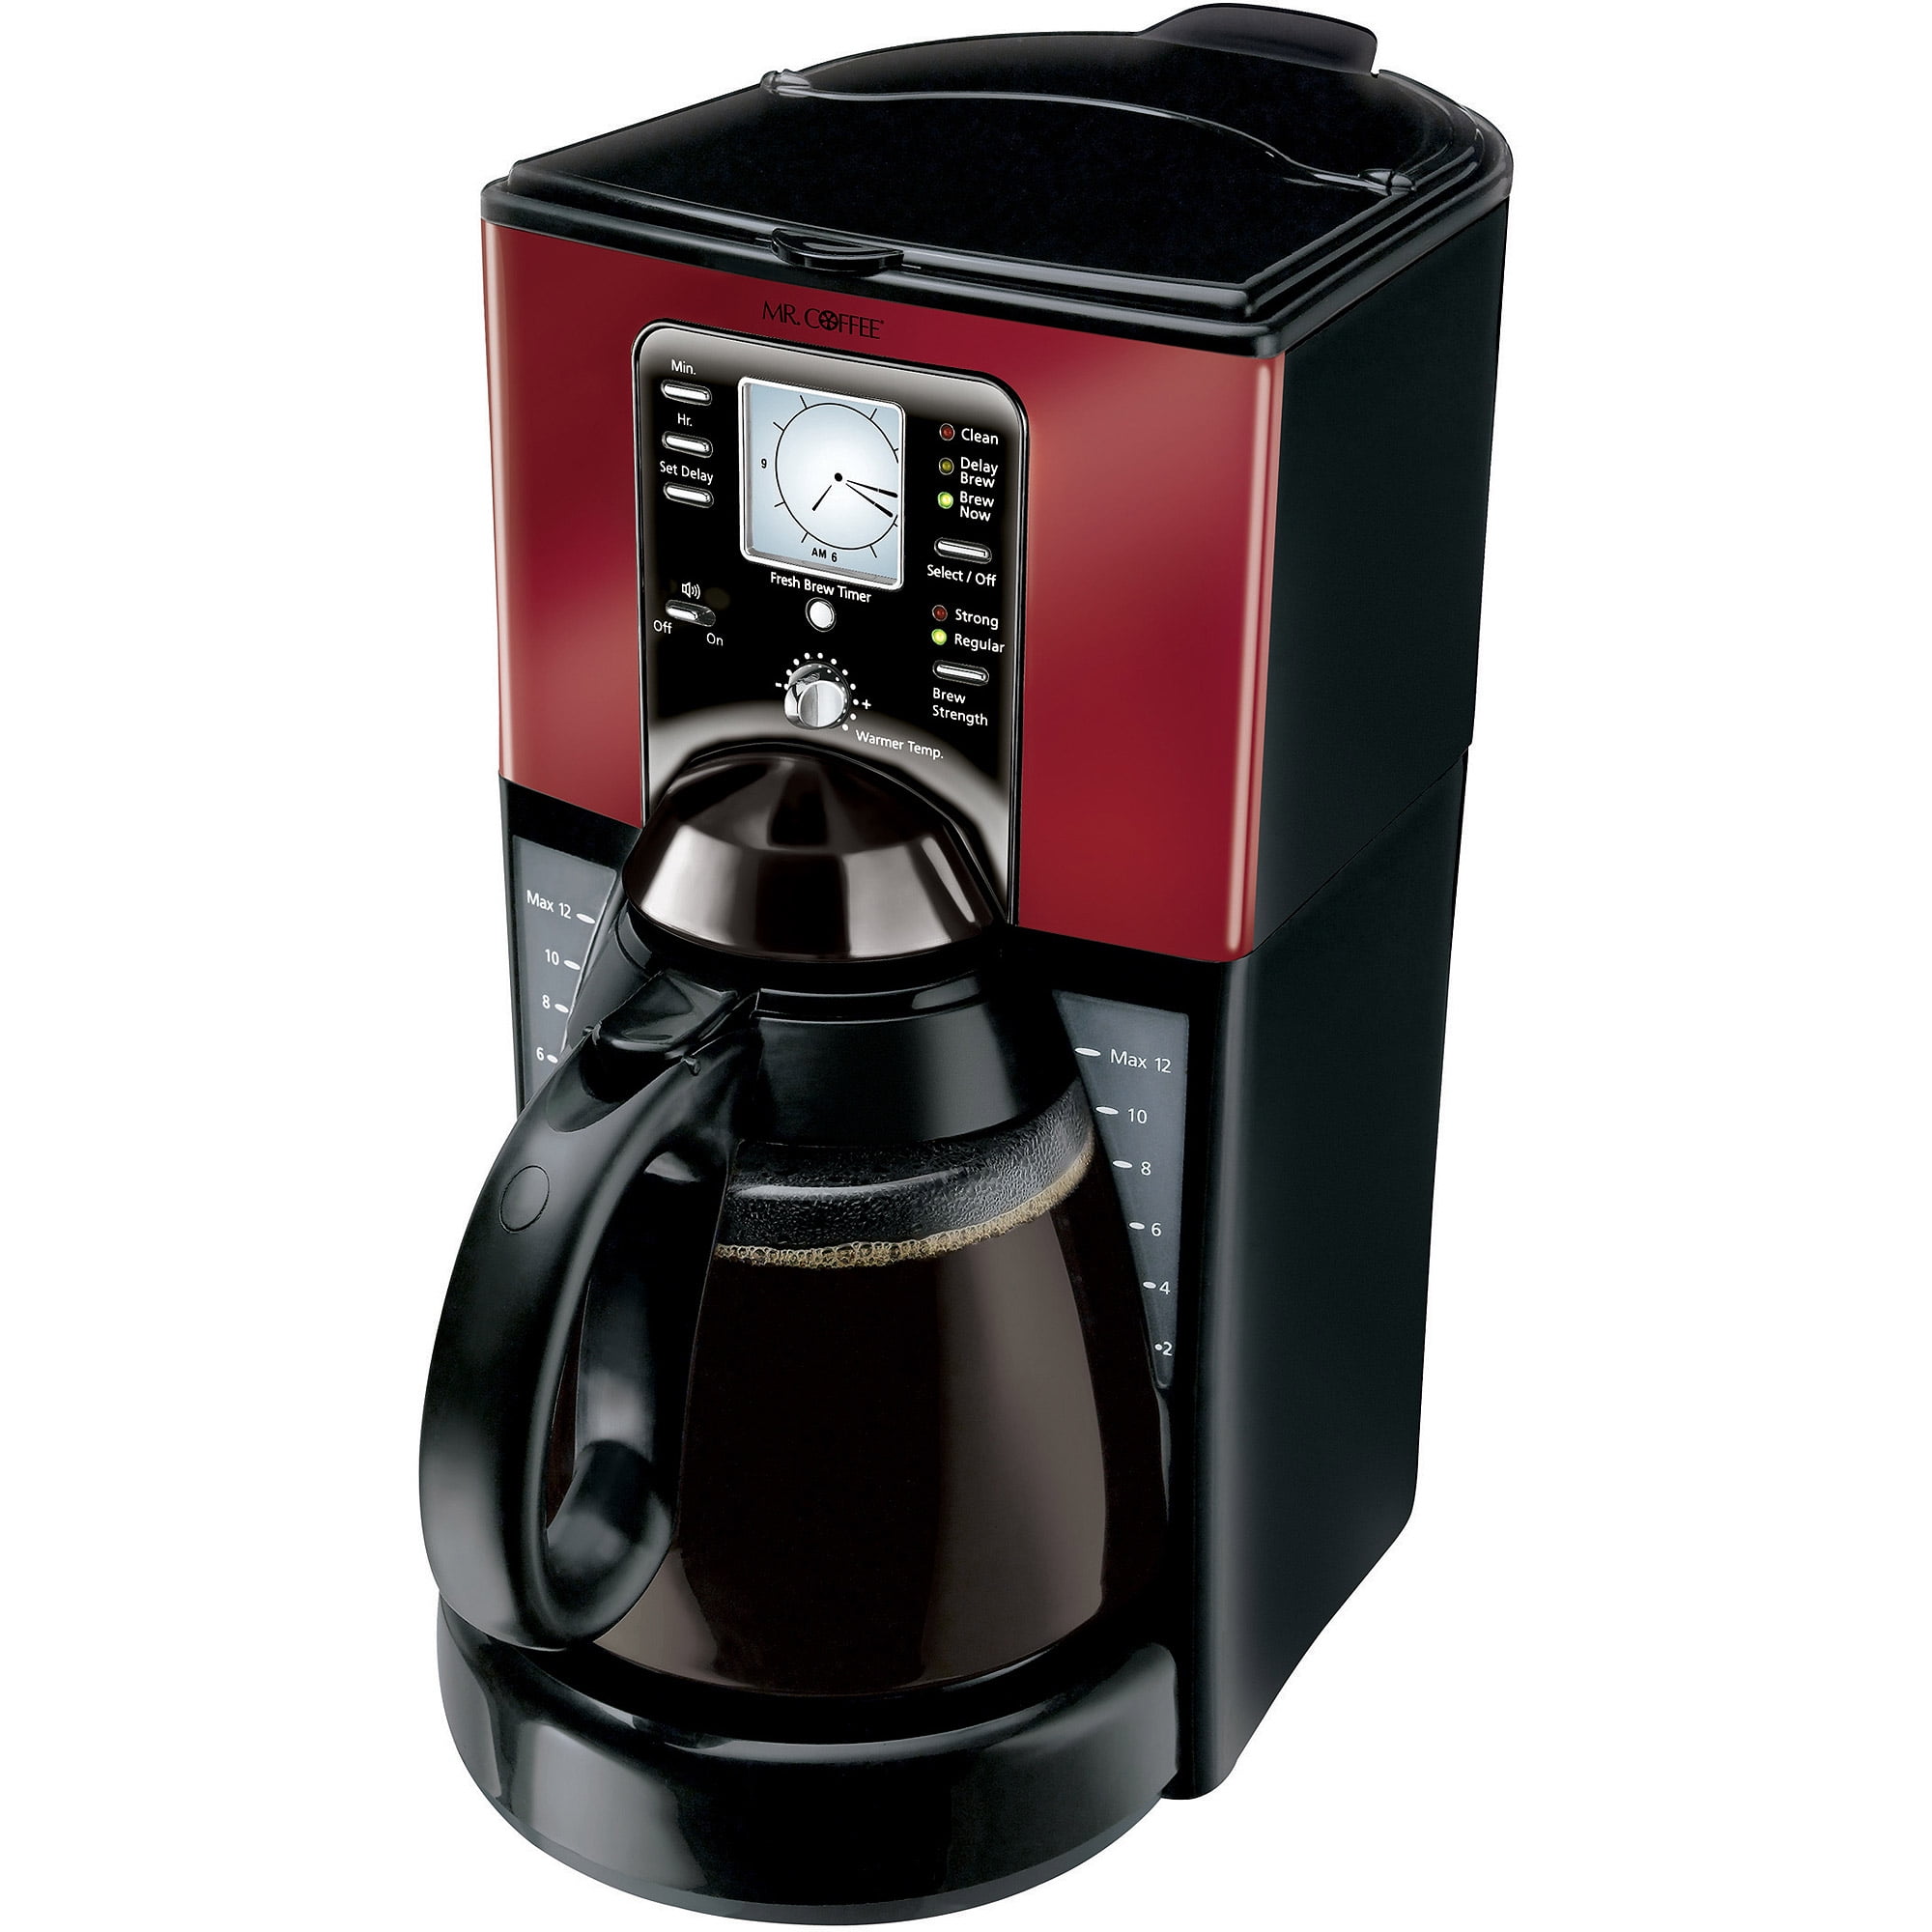 Mr. Coffee 12 Cup Programmable Black Coffee Maker with Hot Water Station 